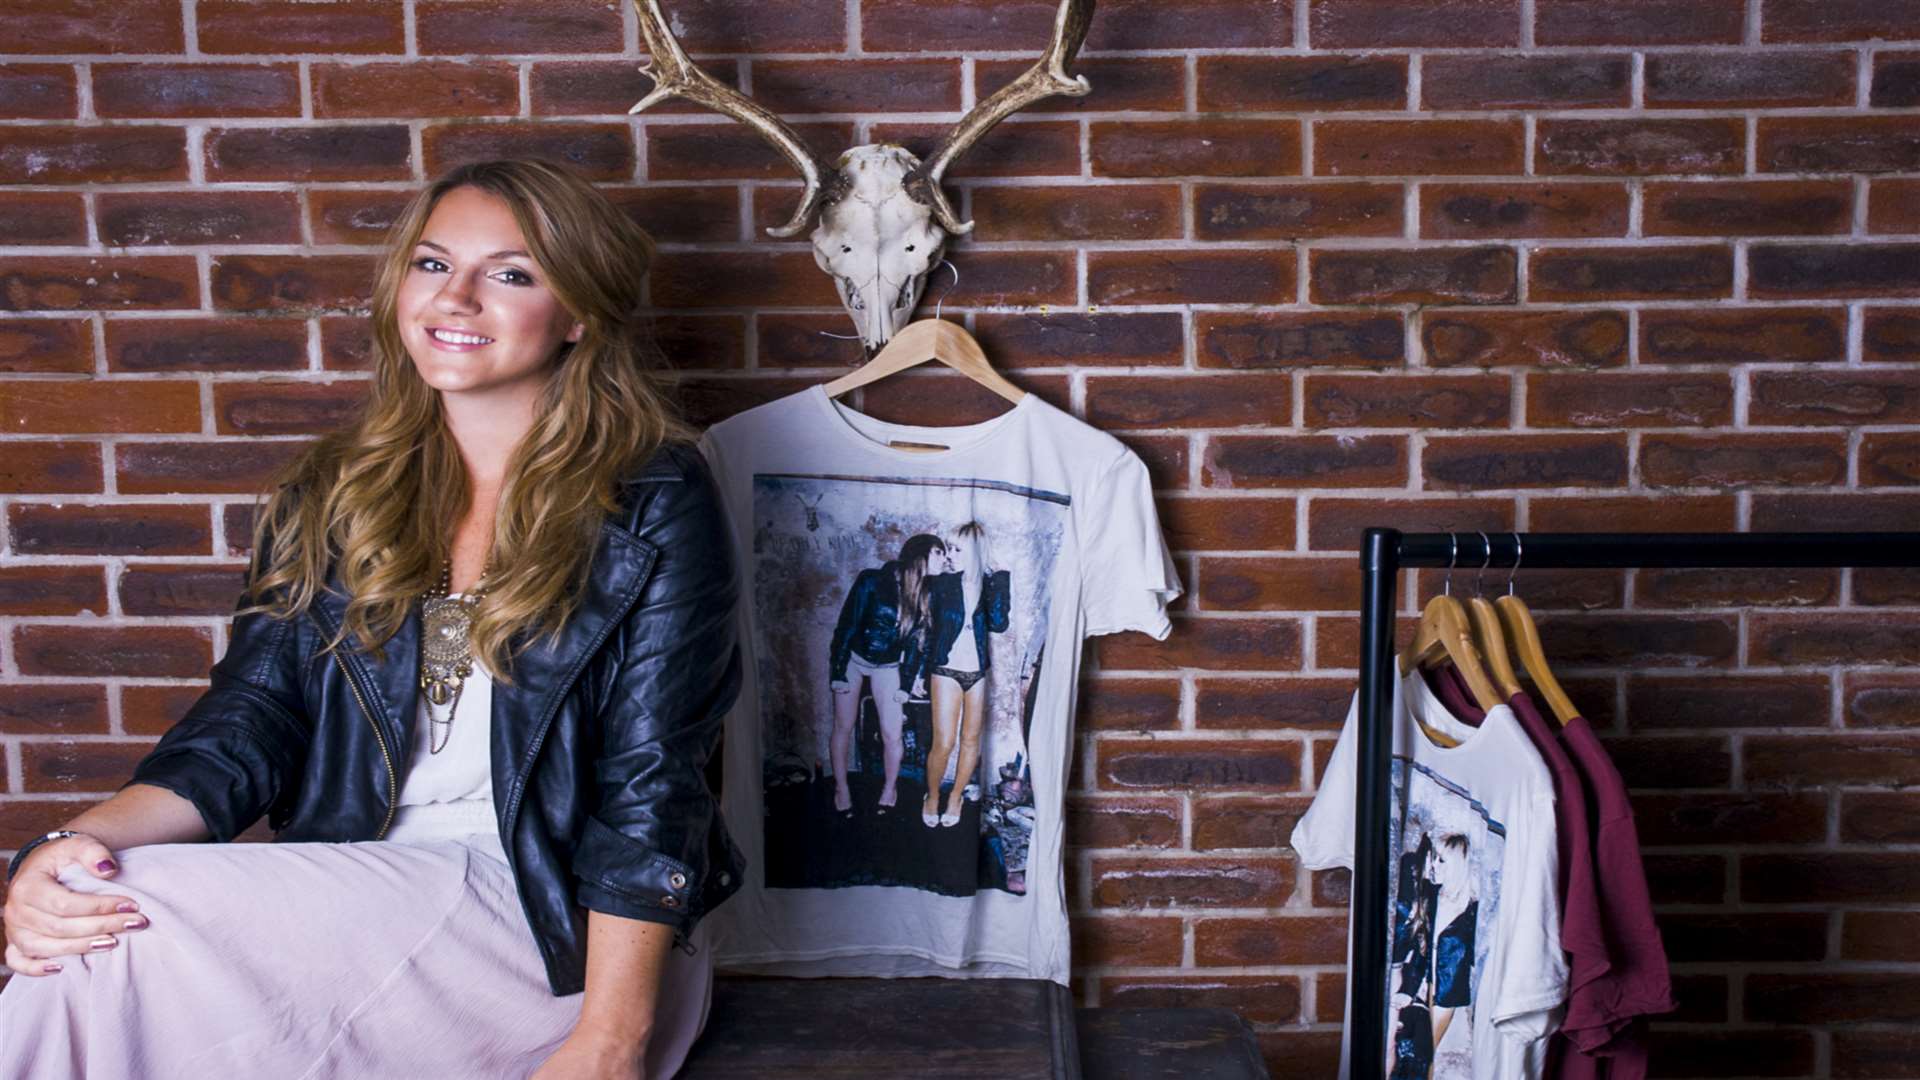 Monks & Co Clothing founder Amy Barker